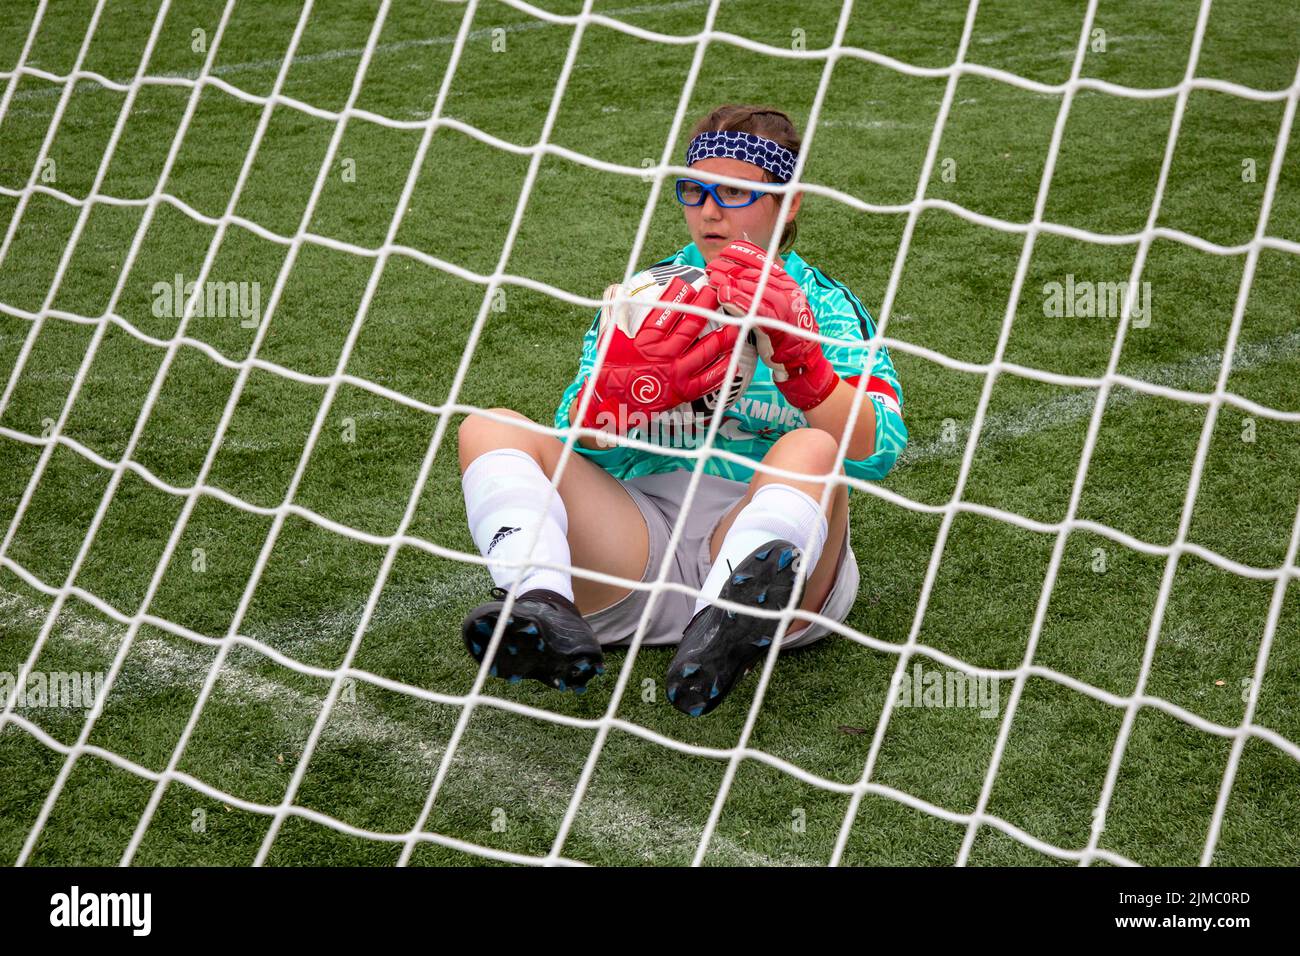 Detroit, Michigan - The U.S. goal keeper cradles the ball after making a save during a match between the women's teams of the United States and Mexico Stock Photo